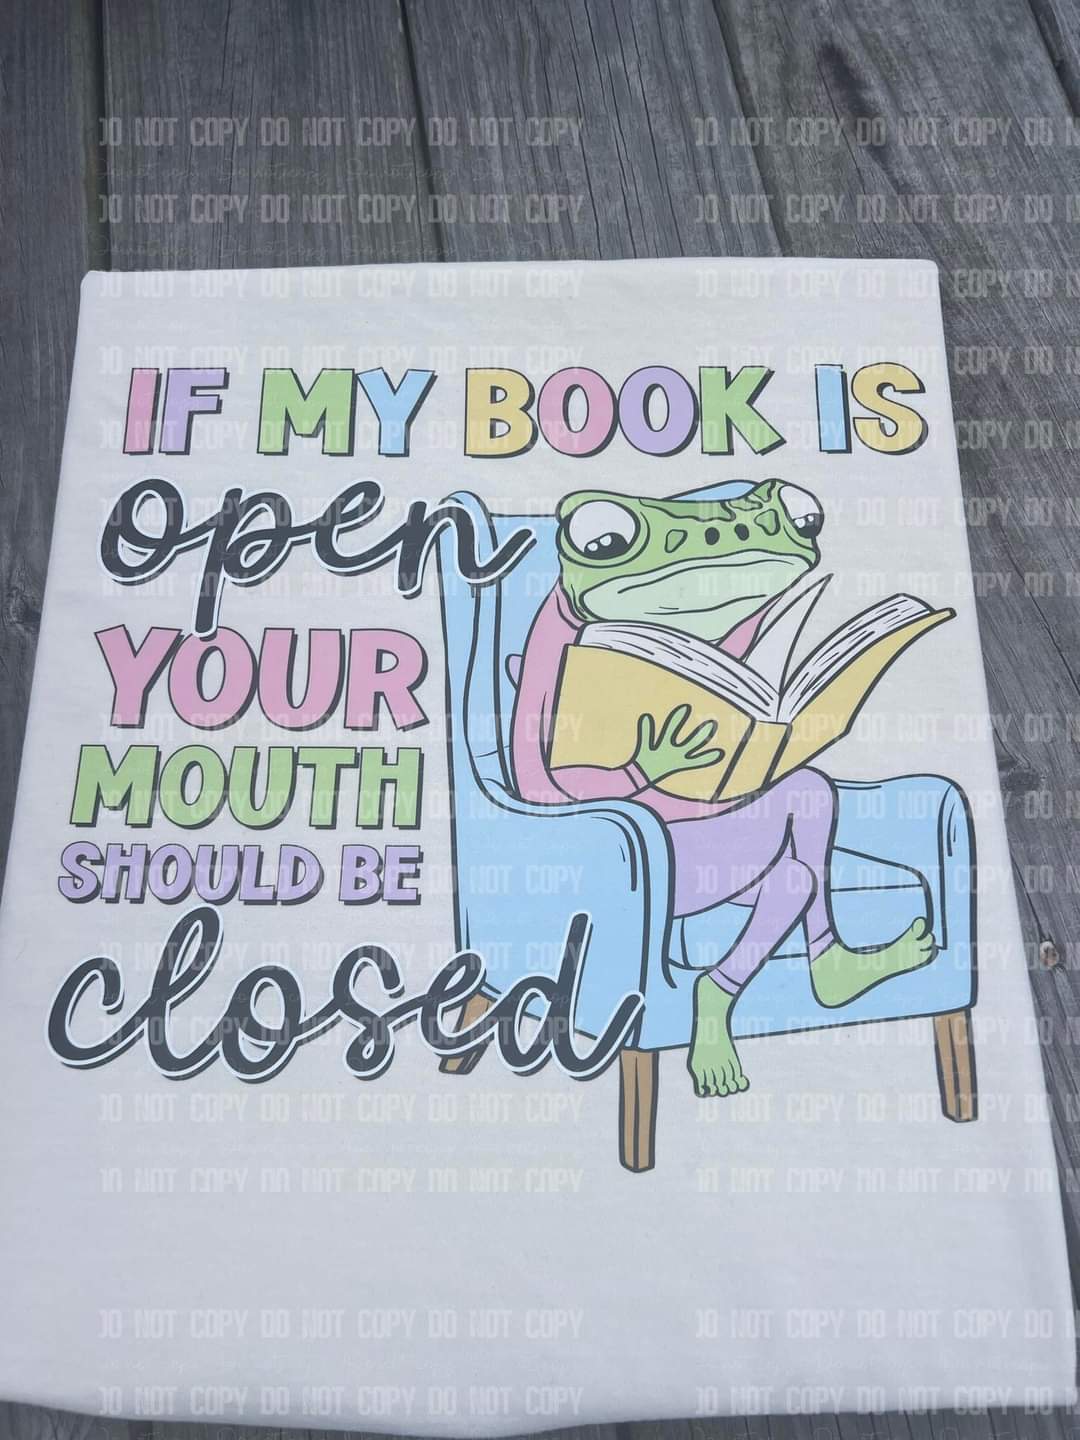 If my book is open T-shirt